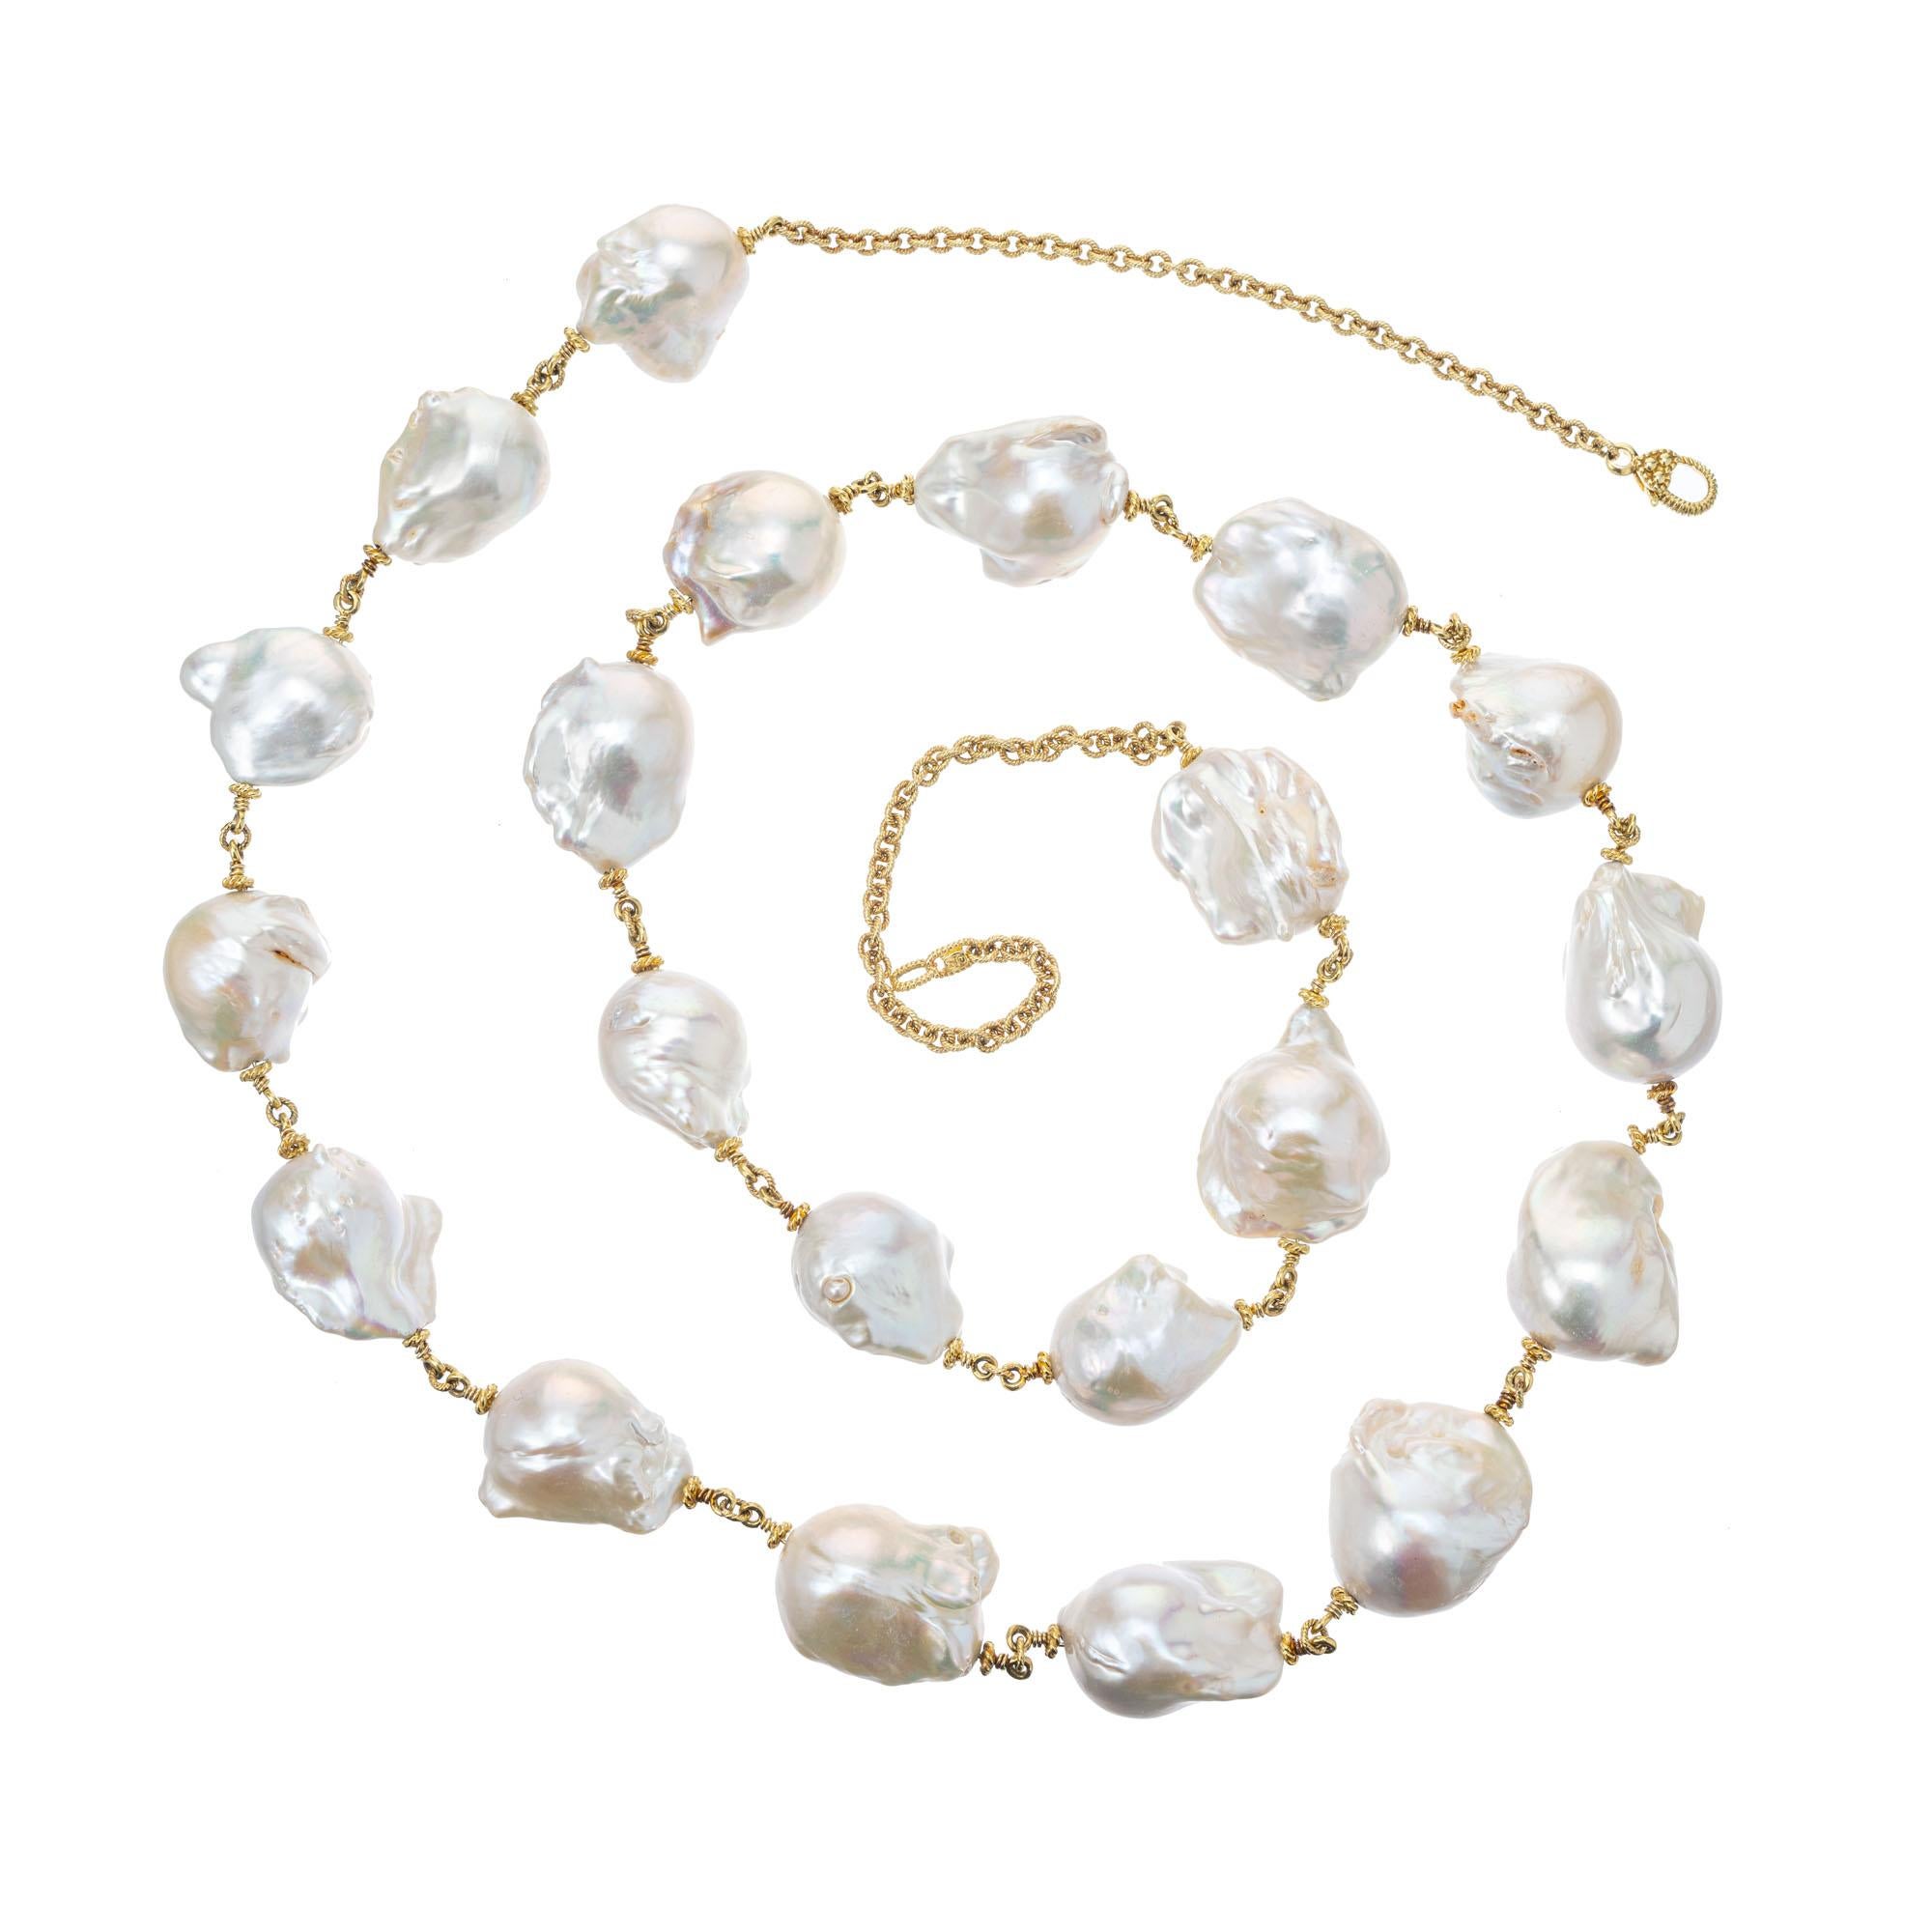 36 Inch long Paloma Pearl Necklace by Judith Ripka. 18k yellow gold chain with 21 large well matched freshwater baroque pearls. Can be worn long or doubled. 36 inches long. 

21 baroque freshwater white gray hue pearls, 14-17mm x 20-23mm
18k yellow